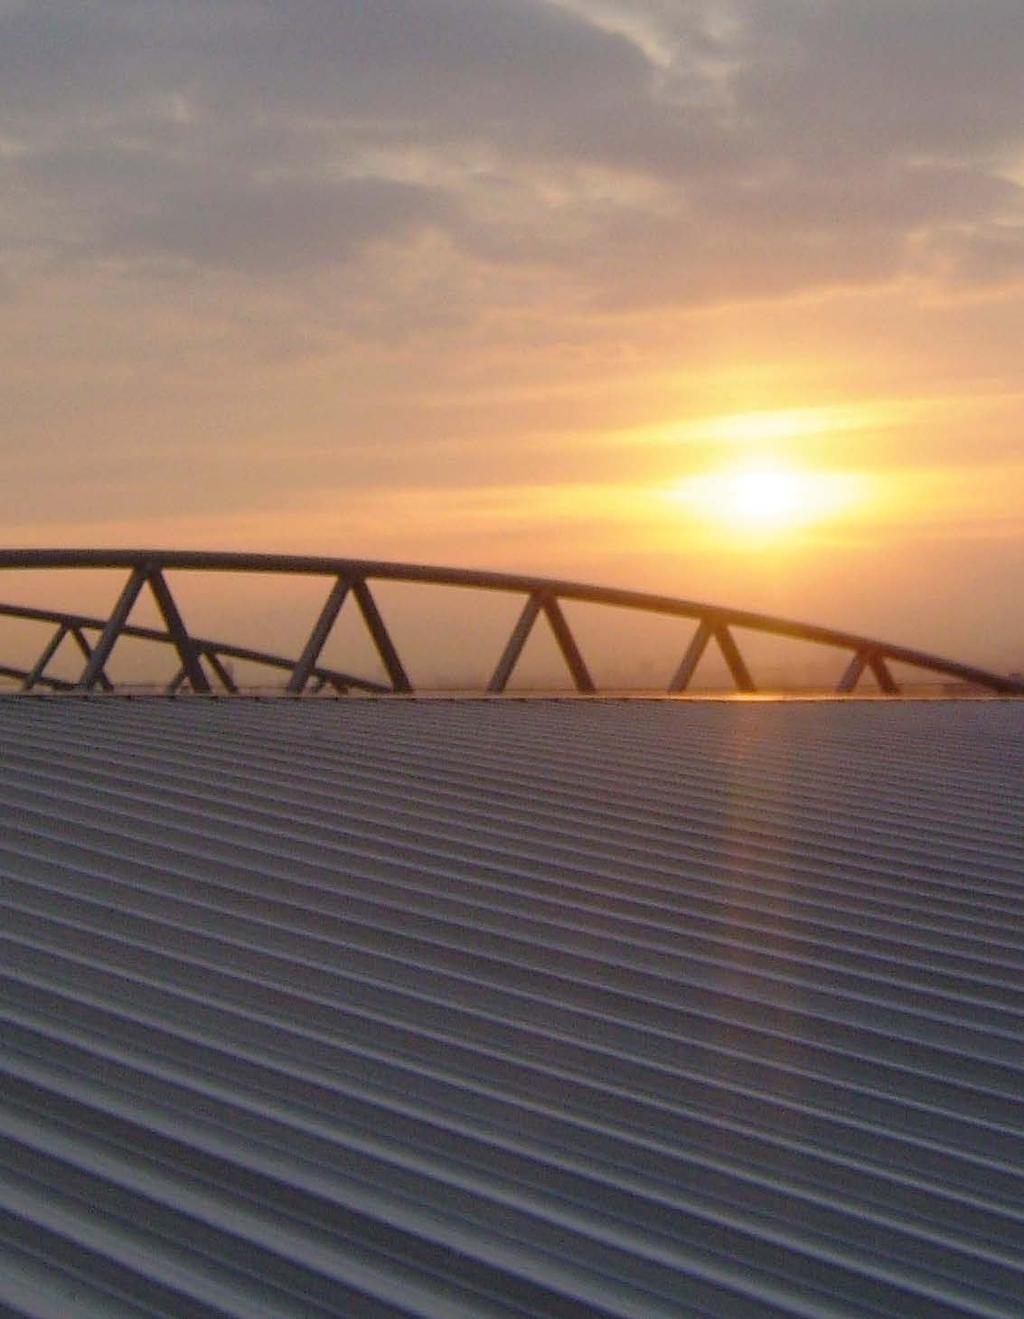 Decks/Liners Structural steel decks and liner trays Features and Benefits Structural decking offers a simplified method of roof construction by dispensing with the need for purlins.